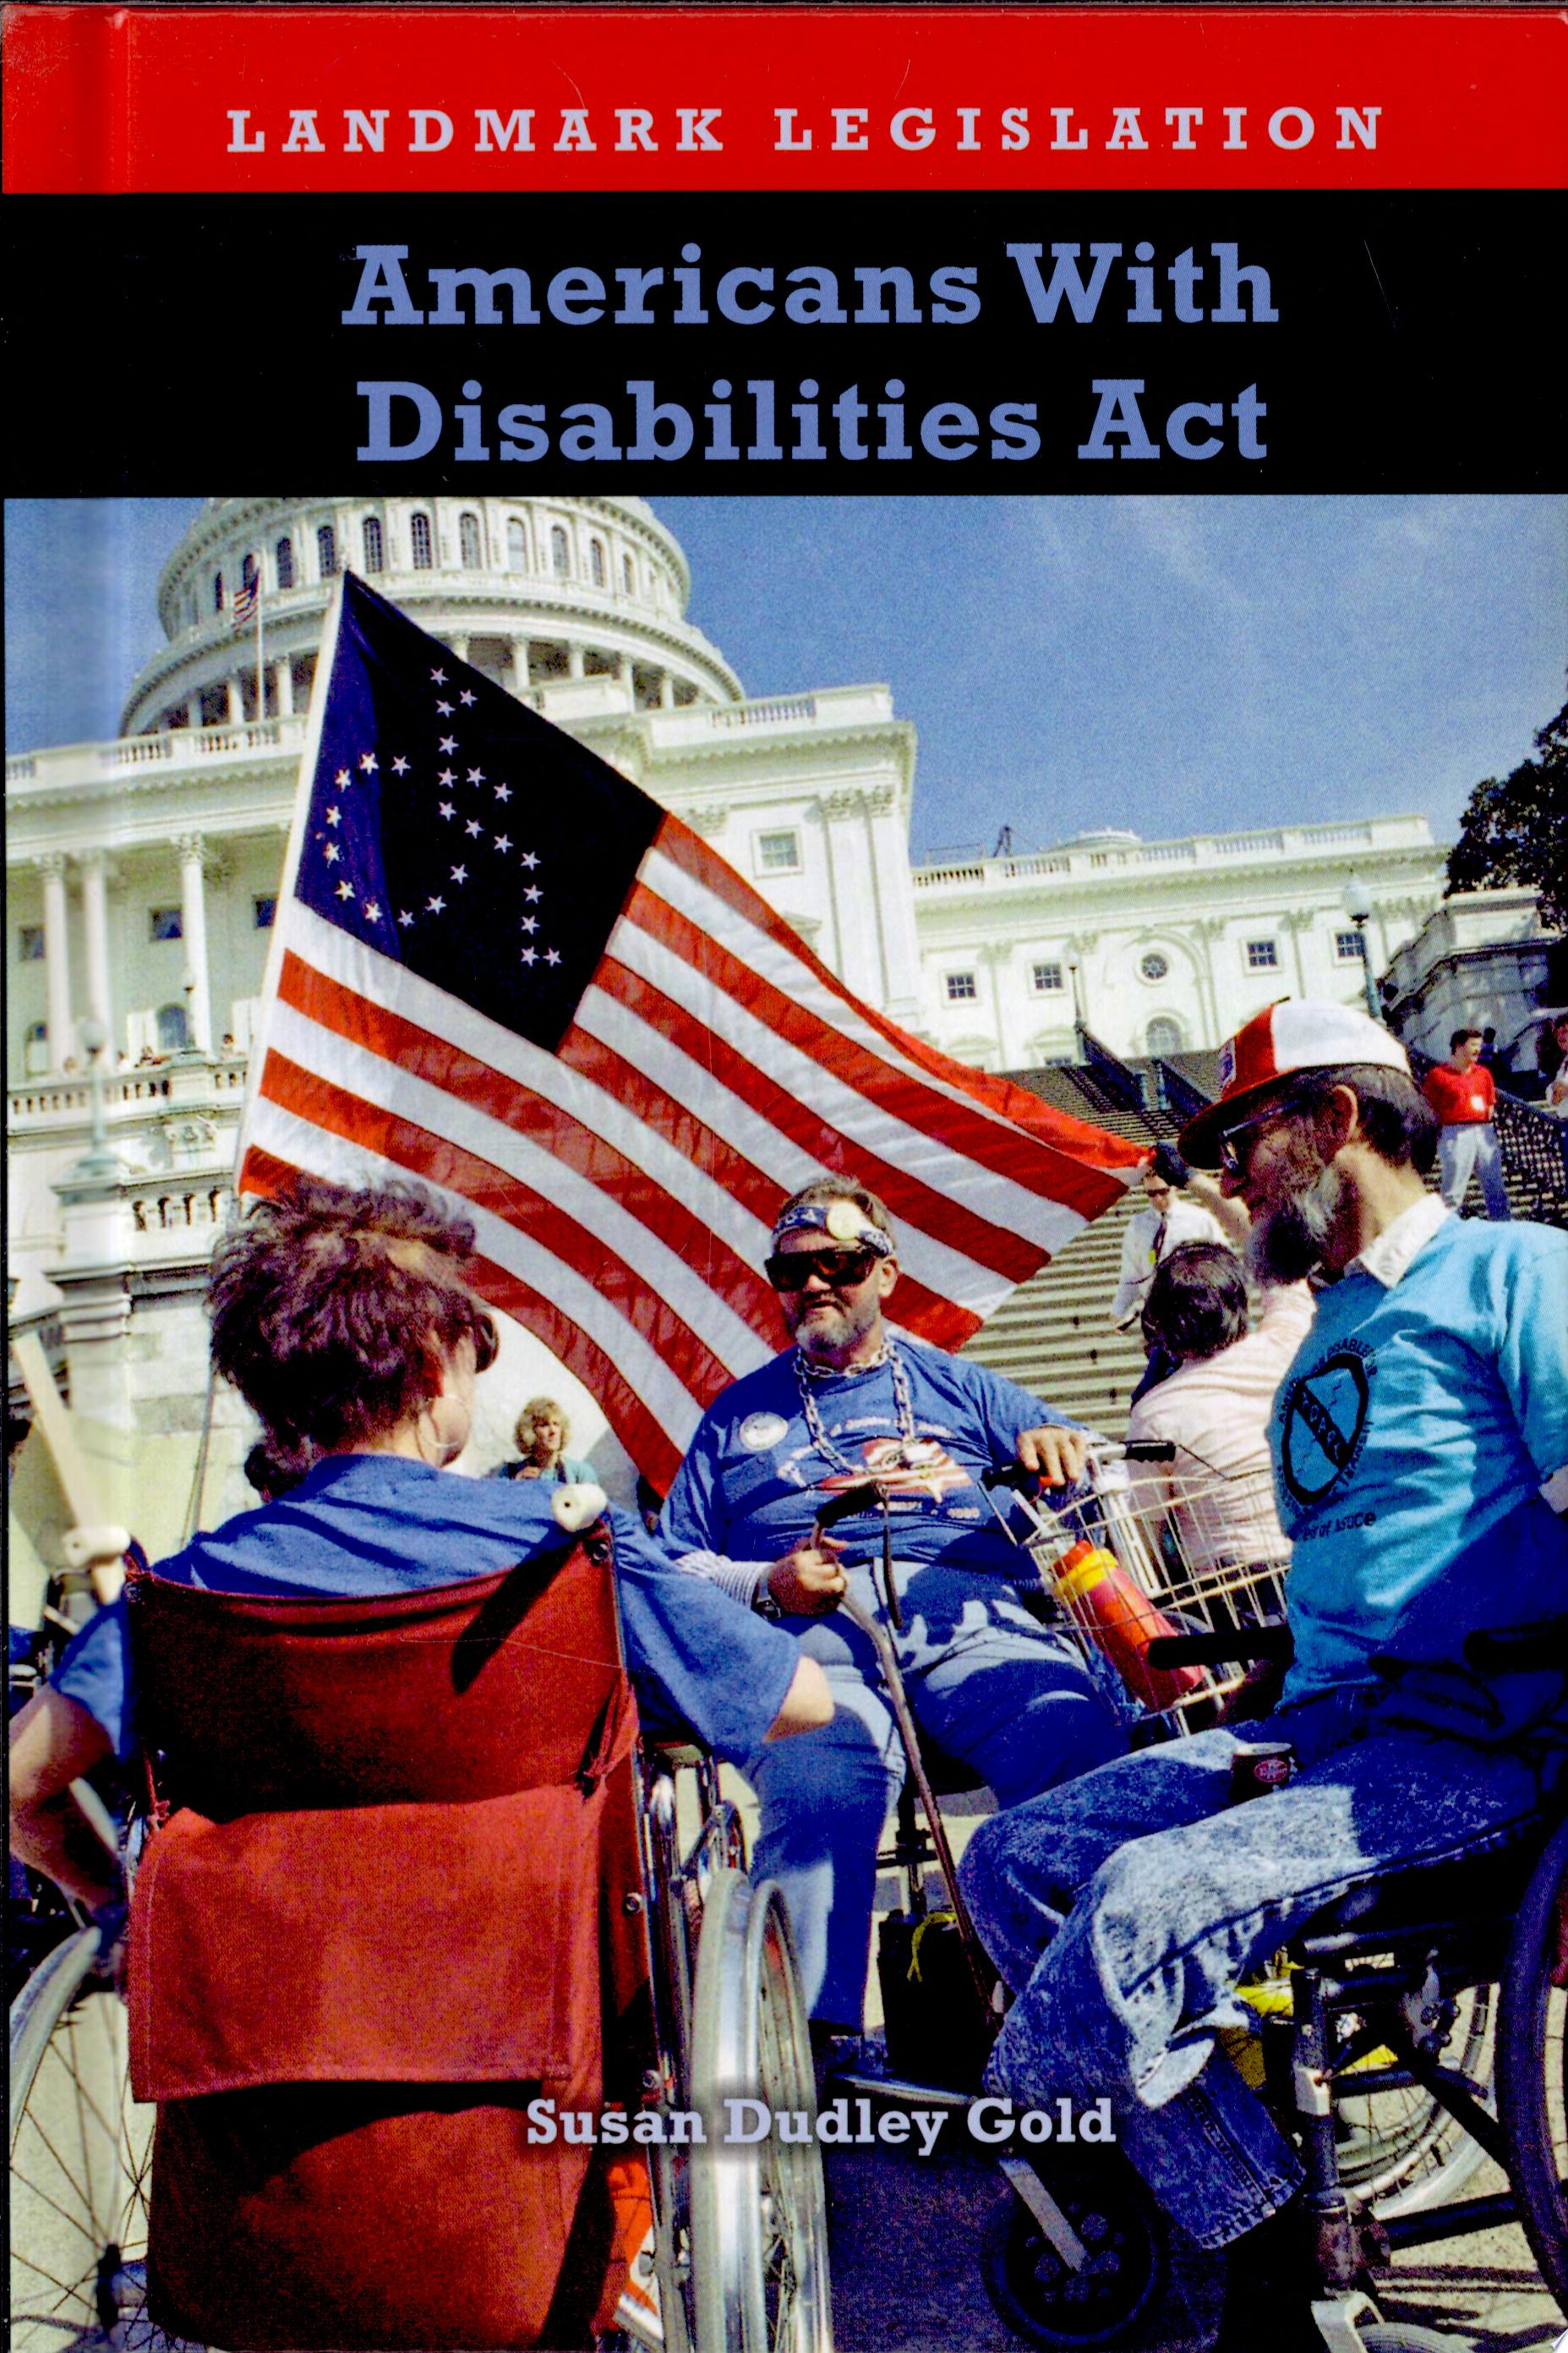 Image for "Americans with Disabilities Act"